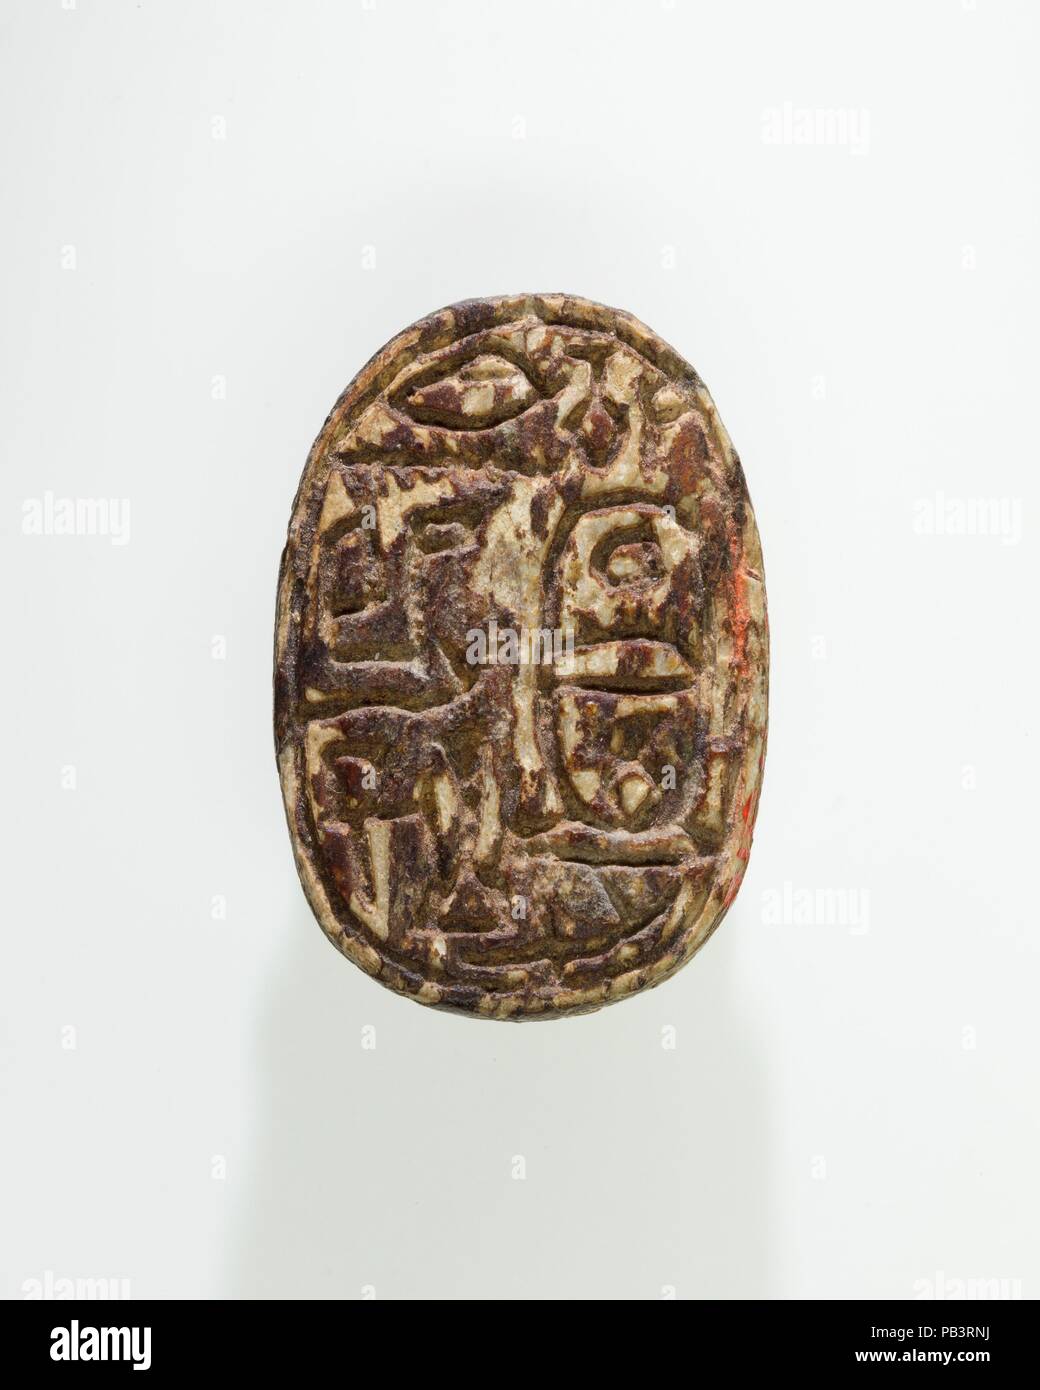 Scarab of Sebekhotep IV. Dimensions: L. 2.4 × W. 1.6 × H. 1 cm (15/16 × 5/8 × 3/8 in.). Dynasty: Dynasty 13-17. Date: ca. 1802-1550 B.C..  Scarab shaped seal inscribed with the prenomen and filiation of Sebekhotep IV: 'the good god Khaneferre, begotten of the god's father Ha-ankhef.'. Museum: Metropolitan Museum of Art, New York, USA. Stock Photo